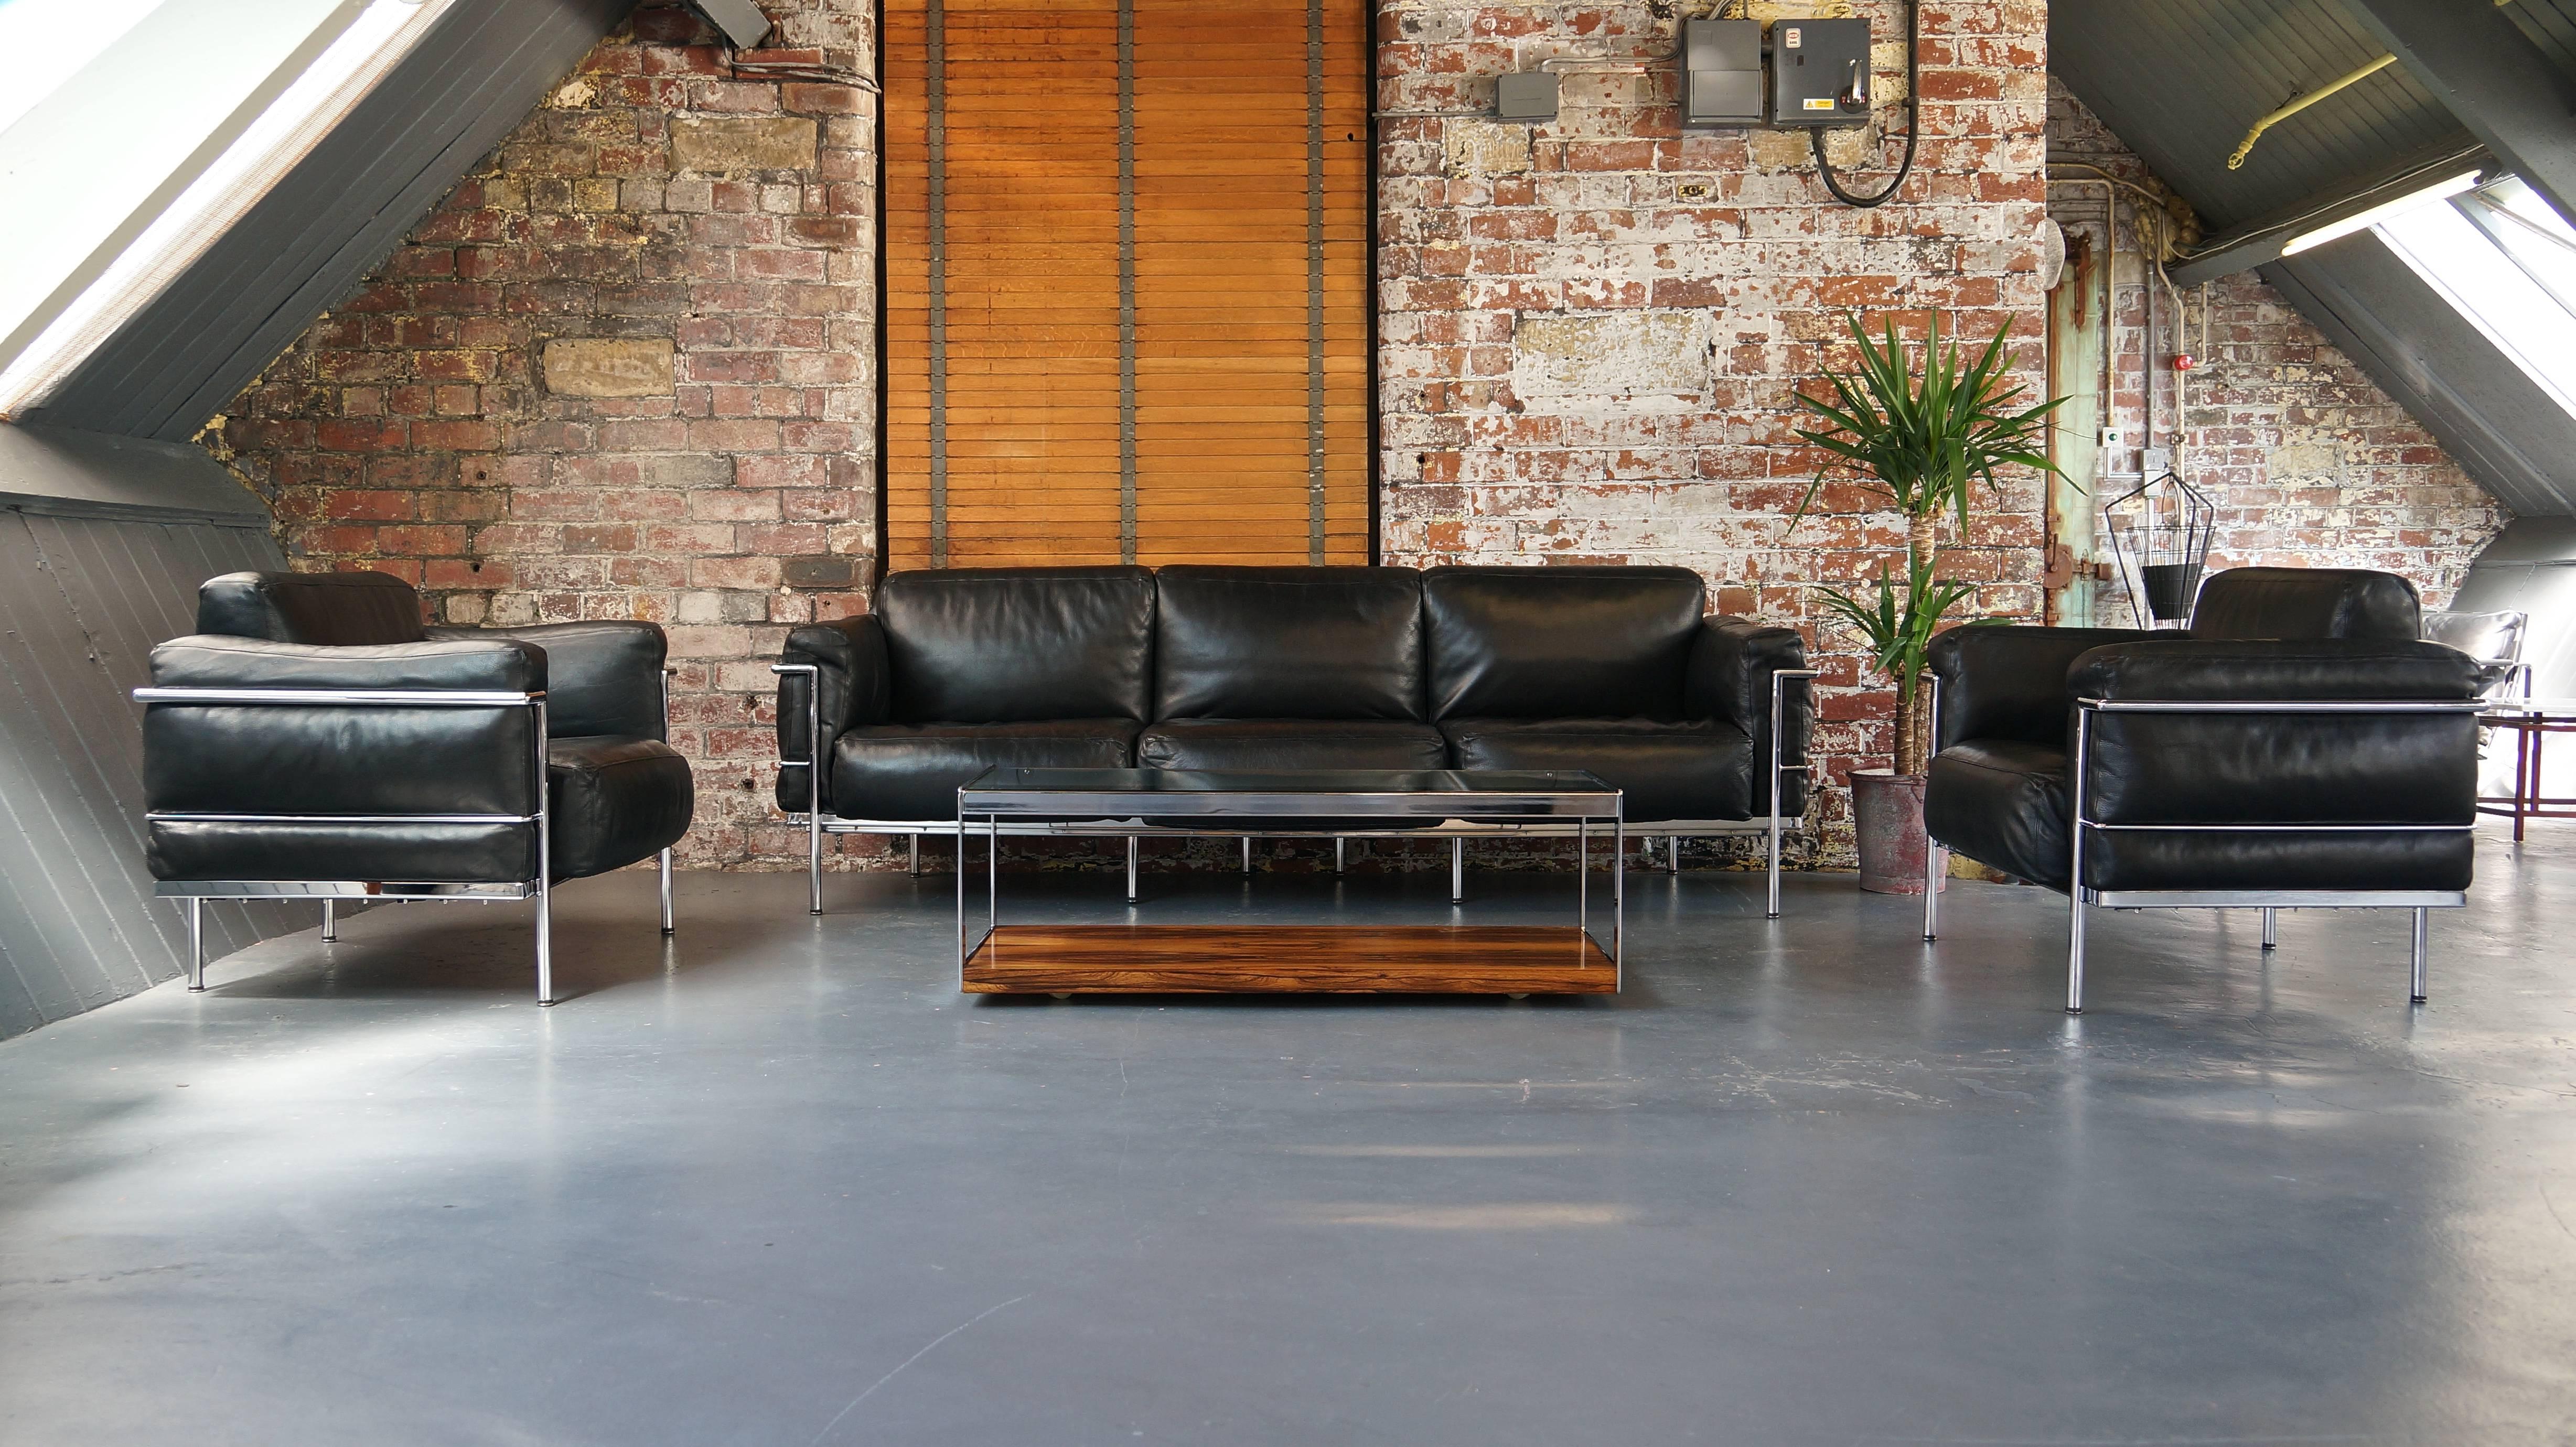 Vintage leather Grand Confort LC3 lounge suite

Including a pair of LC3 Armchairs along with the matching three-seat LC3 Sofa

Designed by Le Corbusier, Italy, 1927 

Very high quality LC3 Grand Confort Lounge Suite in high quality black